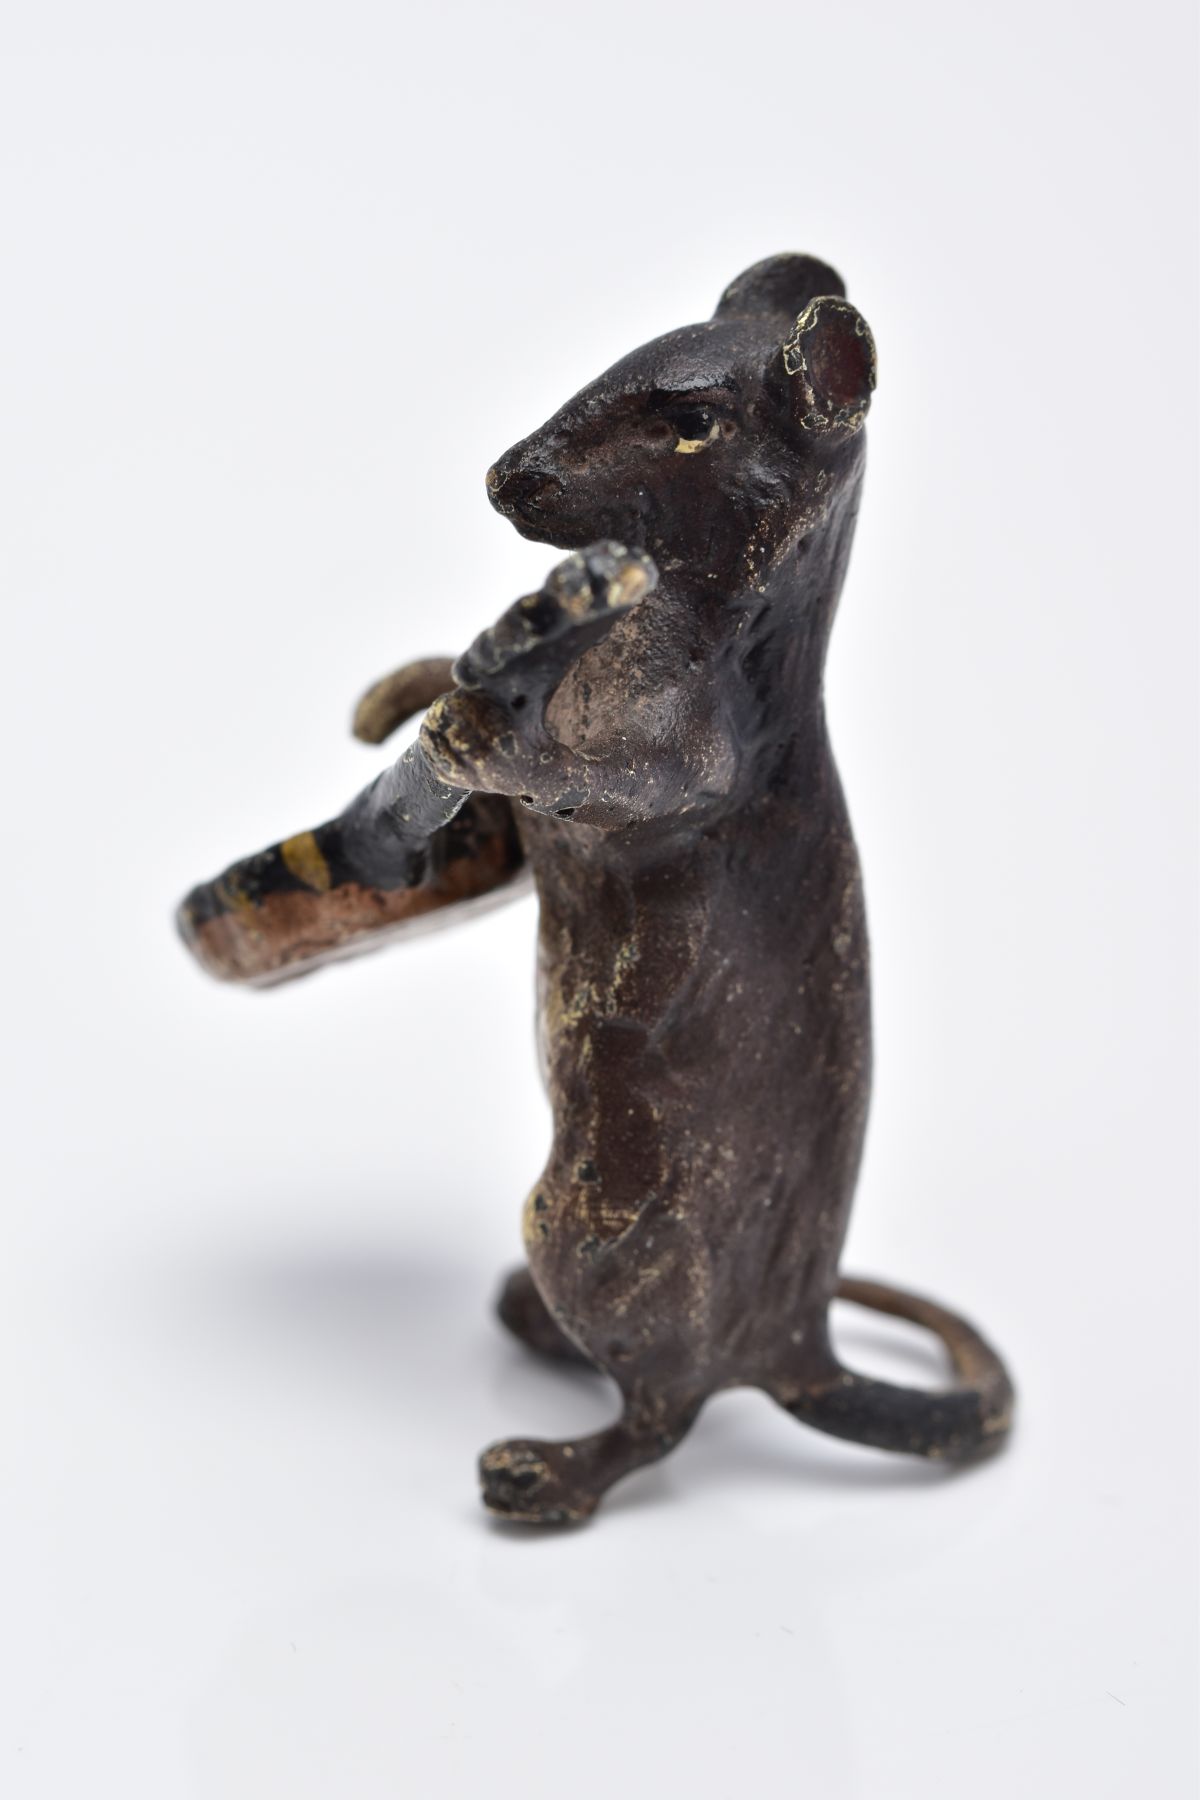 A BERGMAN BRONZE SCULPTURE OF A RAT PLAYING A BANJO, painted bronze figure approximate height 4.5cm, - Image 2 of 4